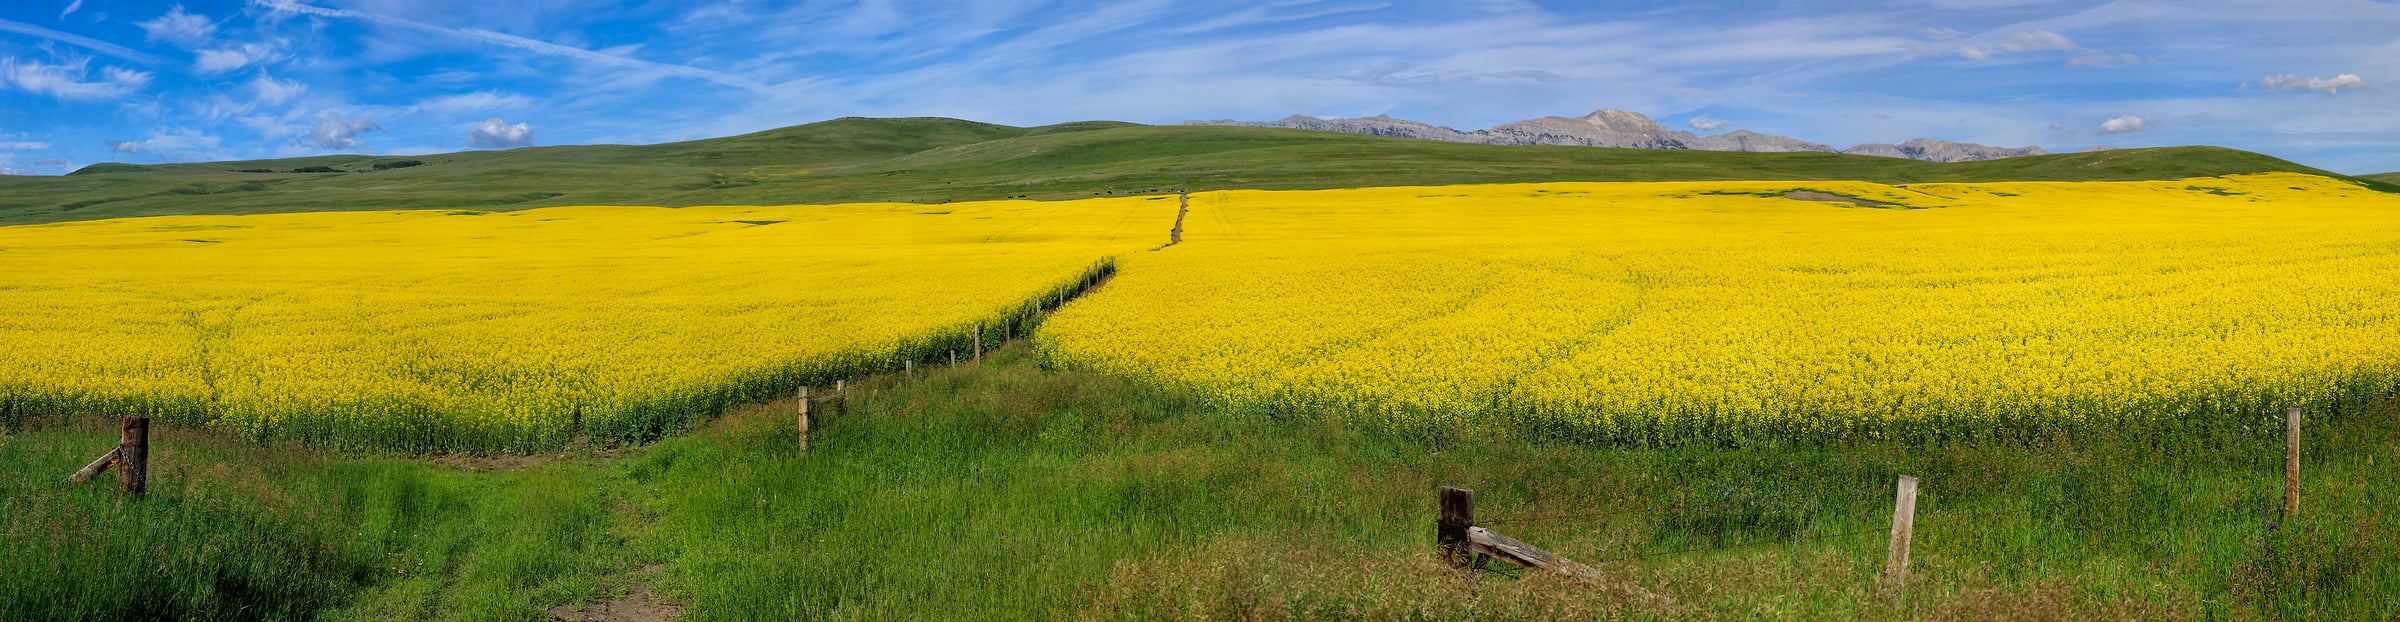 1,107 megapixels! A very high resolution, large-format VAST photo print of a canola field; landscape photograph created by Scott Dimond in Cowboy Trial, Alberta, Canada